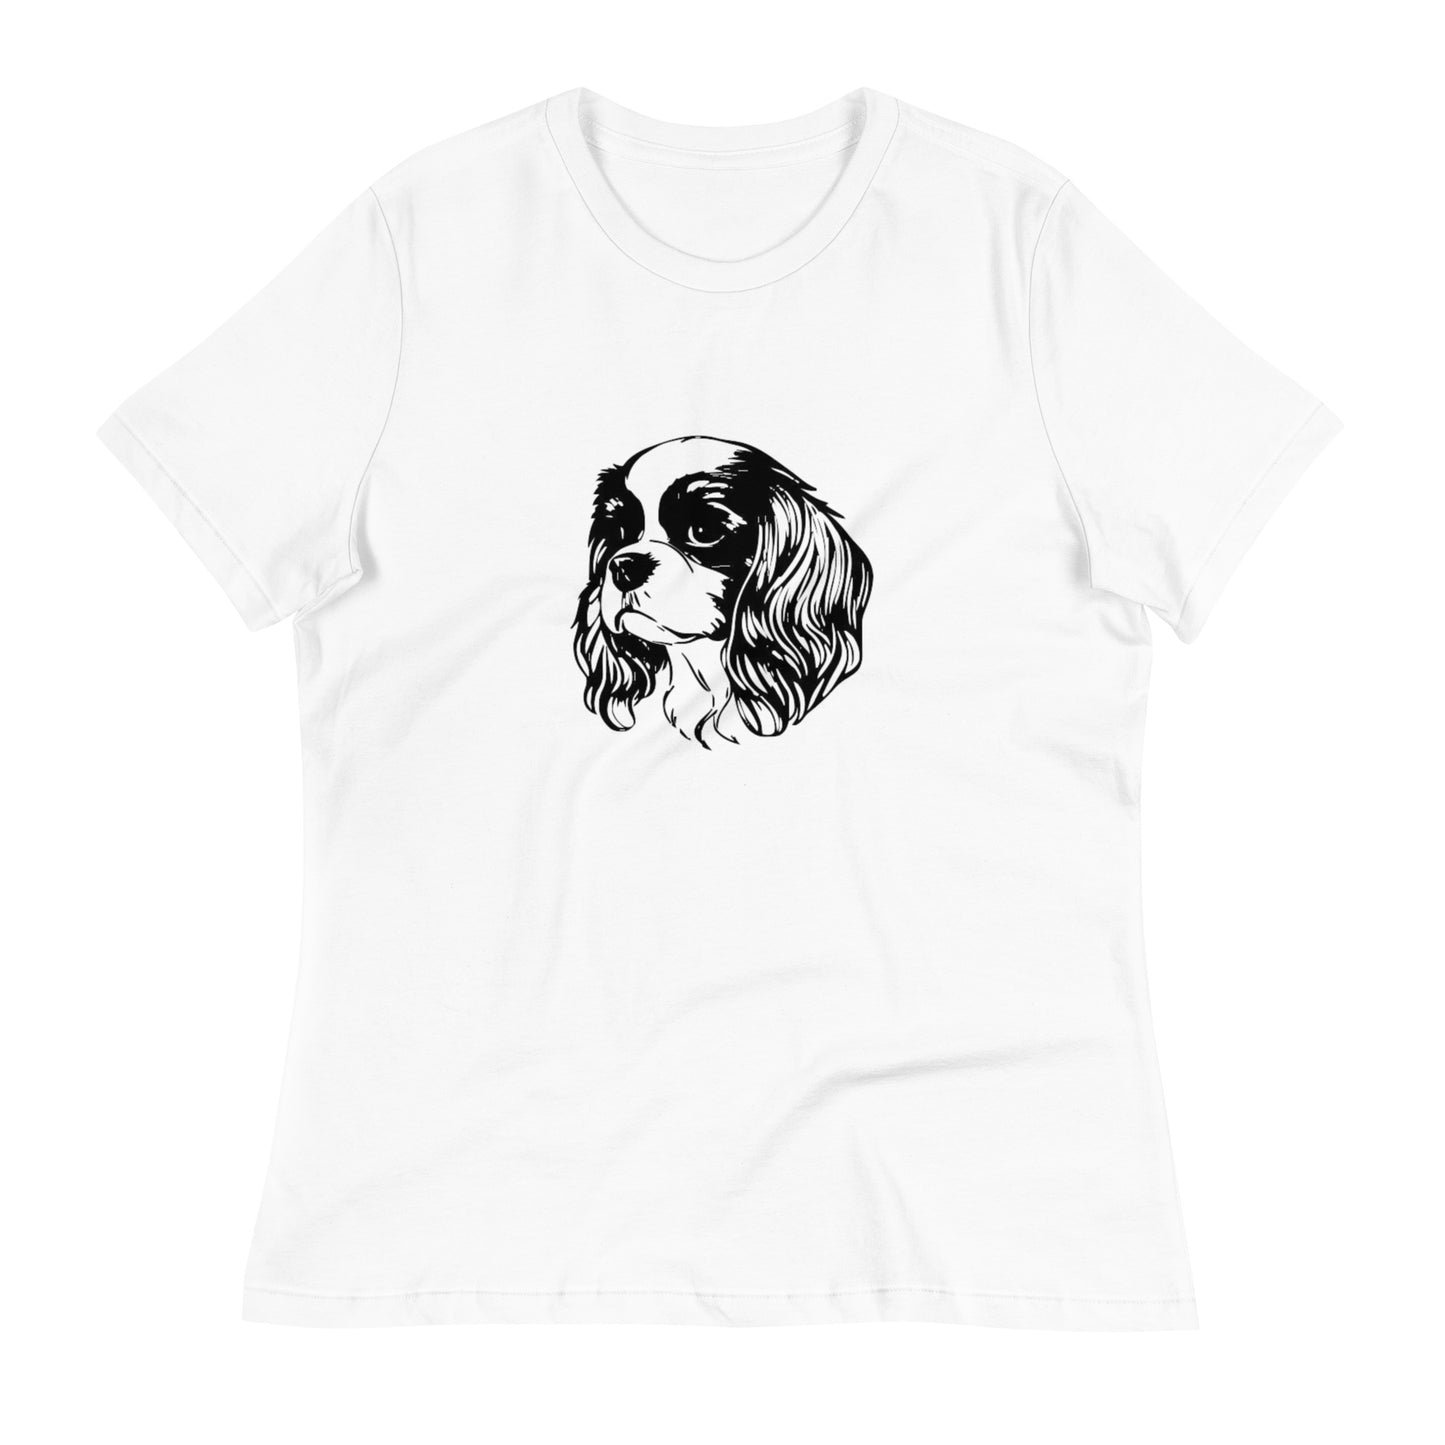 Cavalier King Charles Spaniel Graphic Women's Relaxed T-Shirt